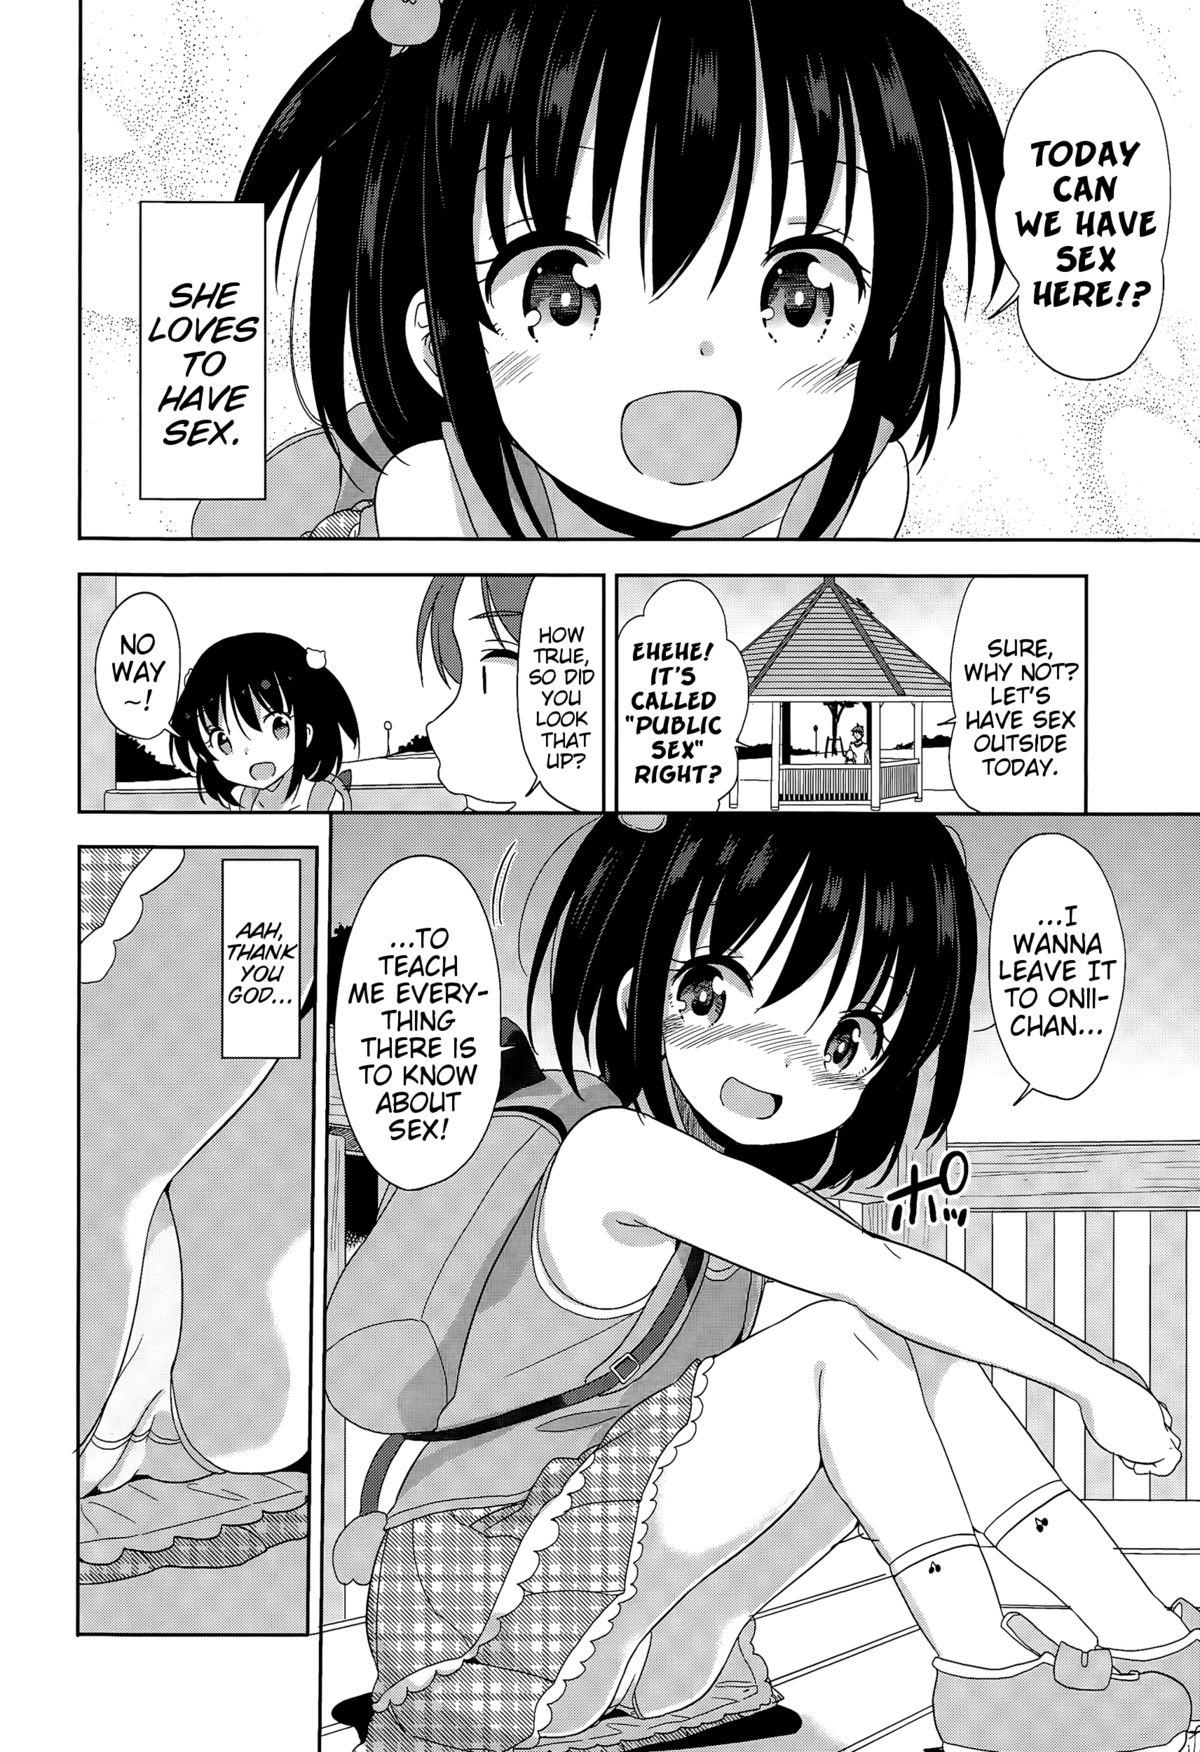 [Fuyuno Mikan] Mei-chan to Issho | Together With Mei-chan (COMIC LO 2015-07) [English] {Mistvern} 1